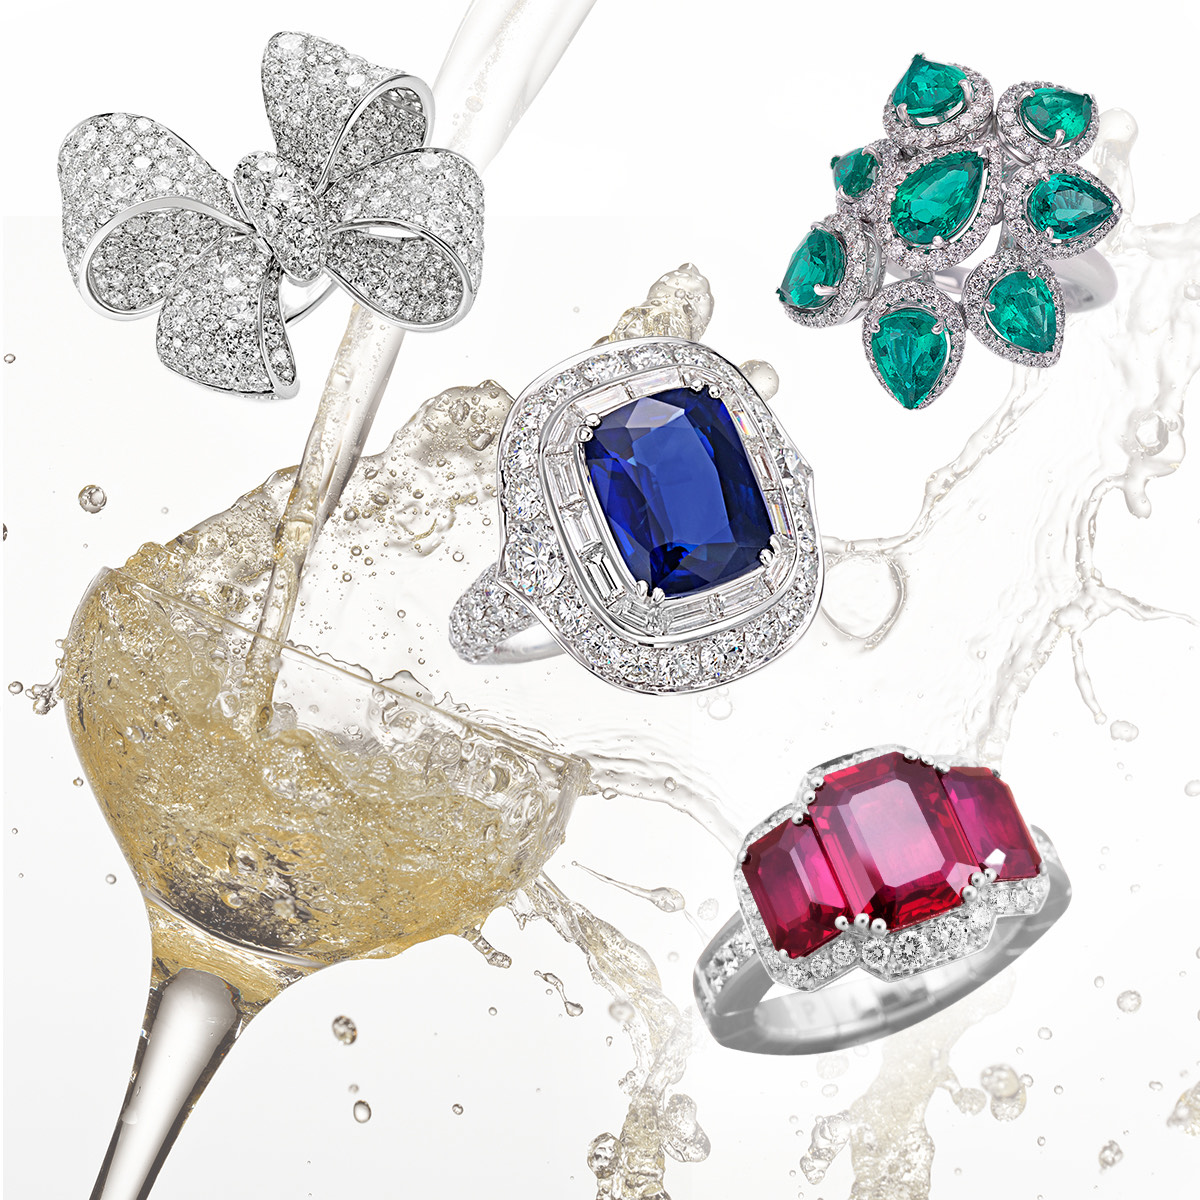 Clockwise from Upper Left – PICCHIOTTI Fiocco (Bow) Ring in White Diamonds, PICCHIOTTI Emerald Masterpieces Ring, PICCHIOTTI Xpandable Ruby cocktail ring, PICCHIOTTI Sapphire Masterpieces ring